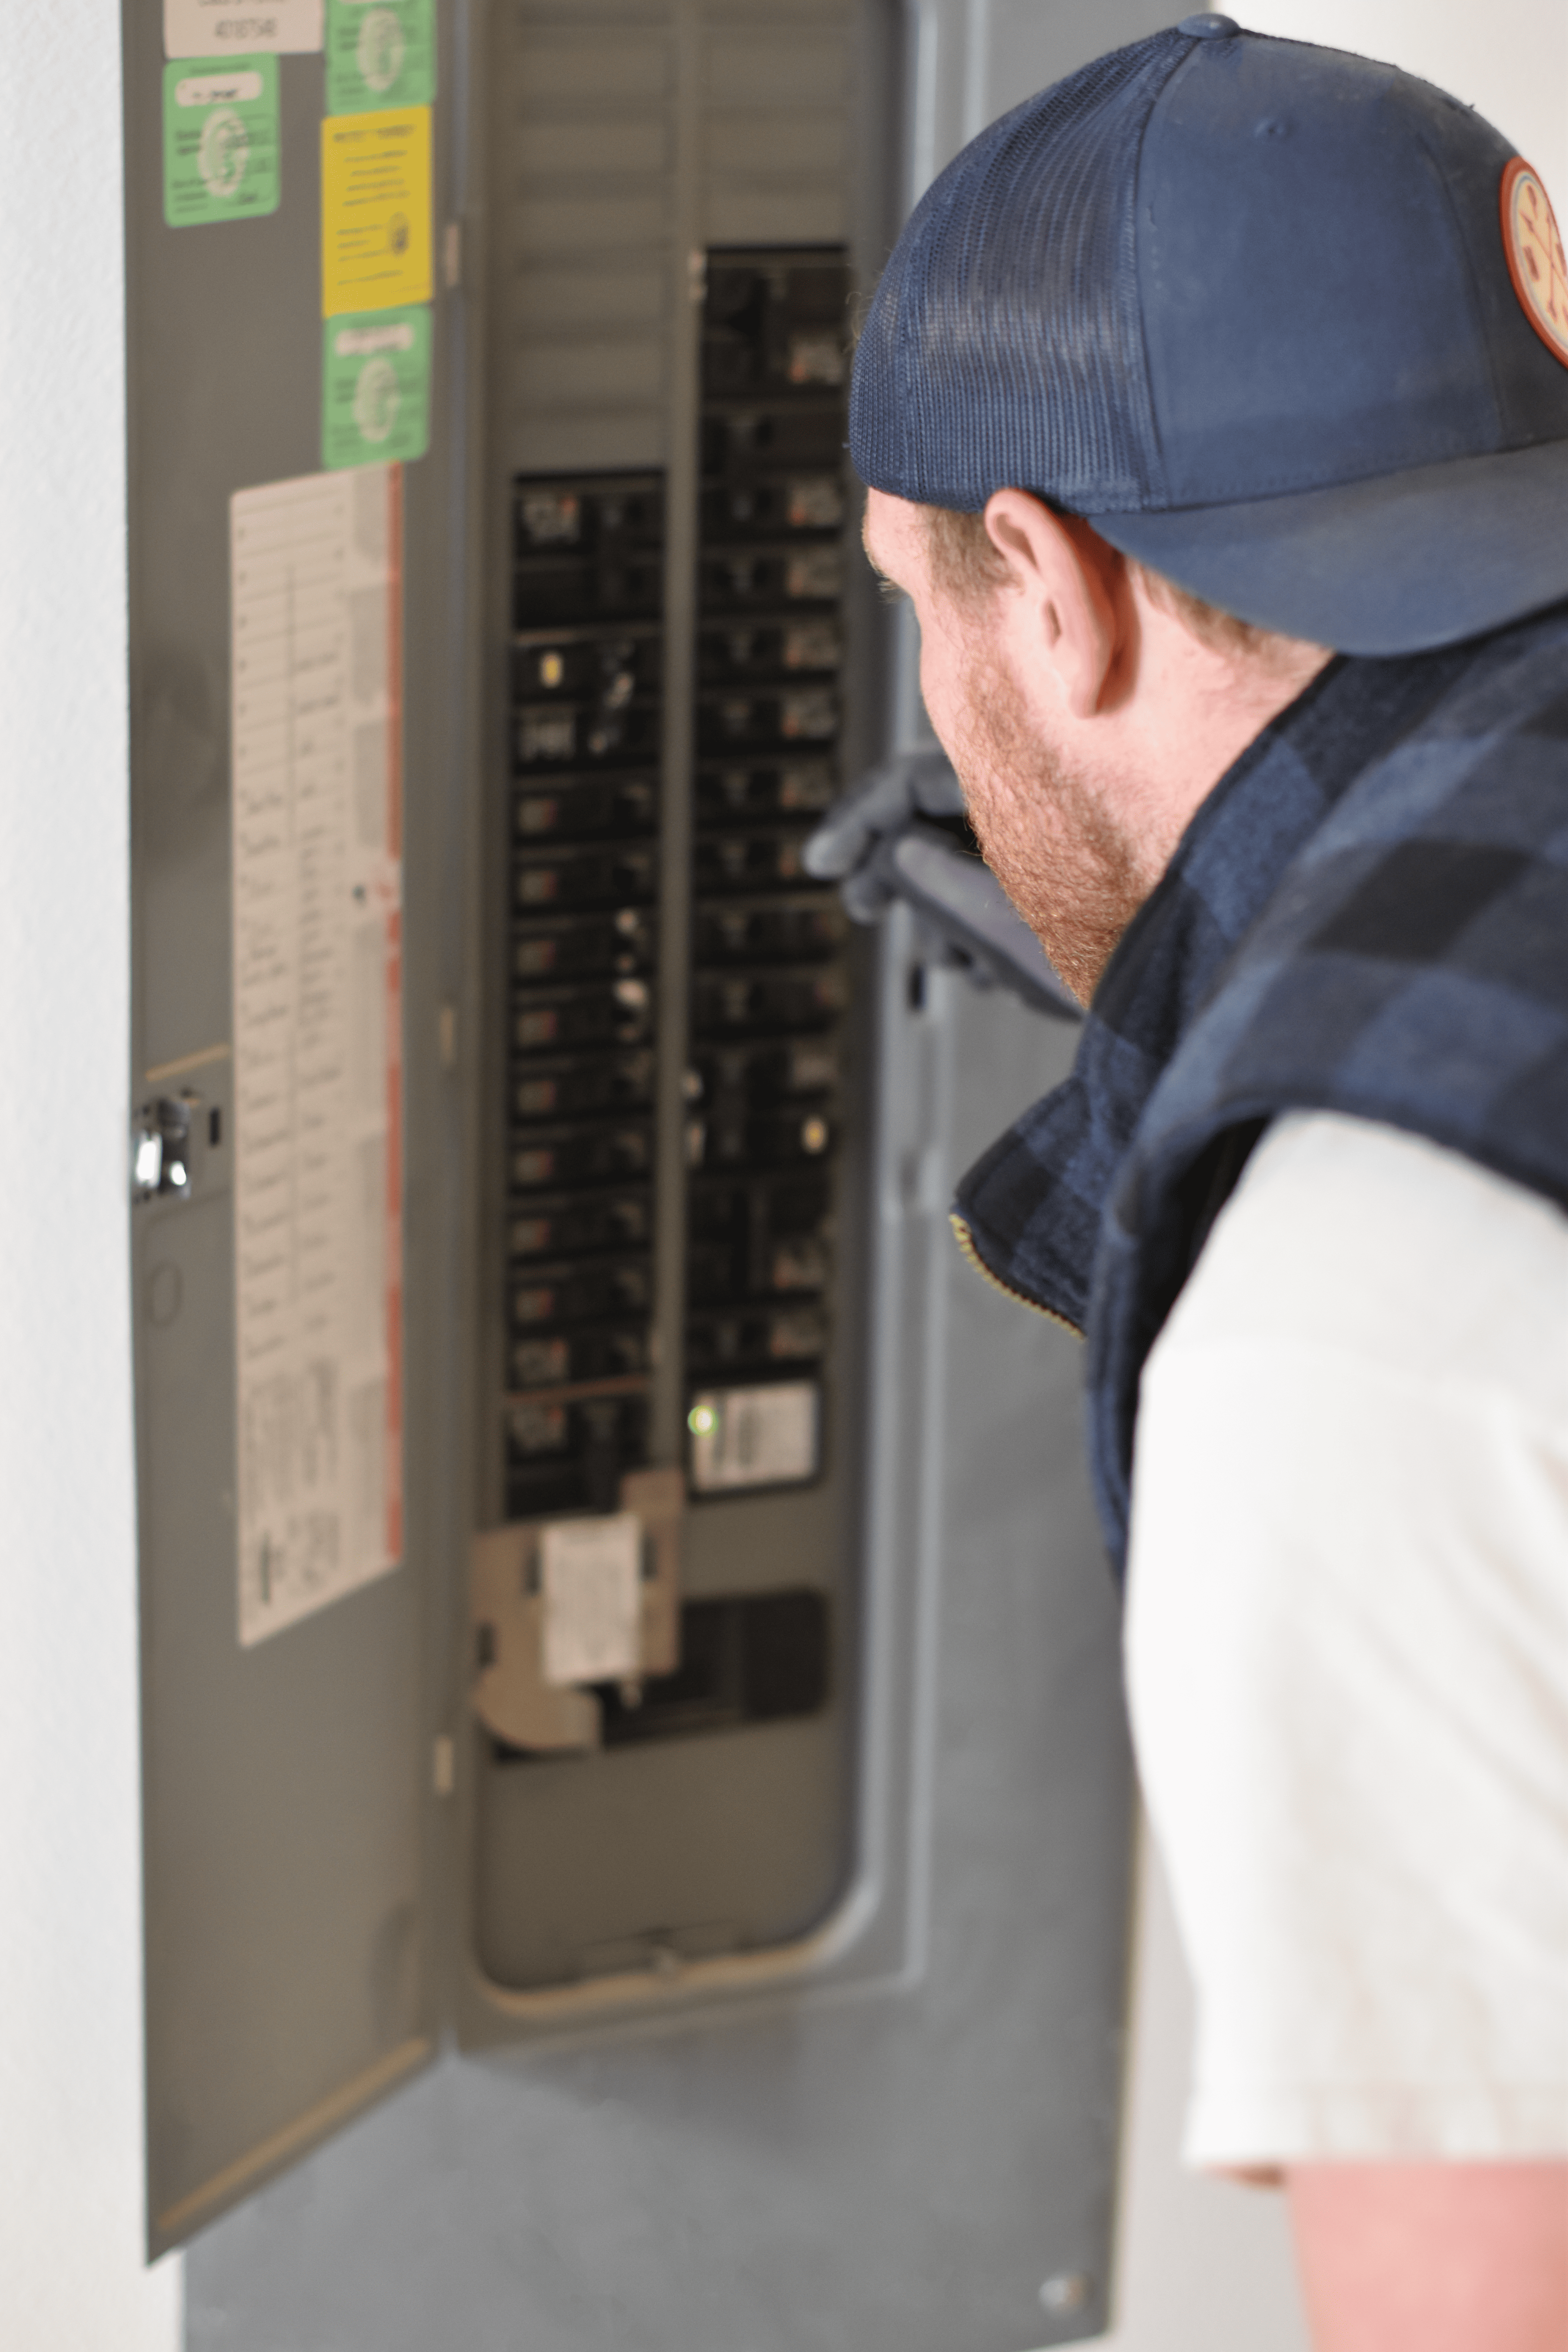 Electrician in electrical panel for panel upgrade